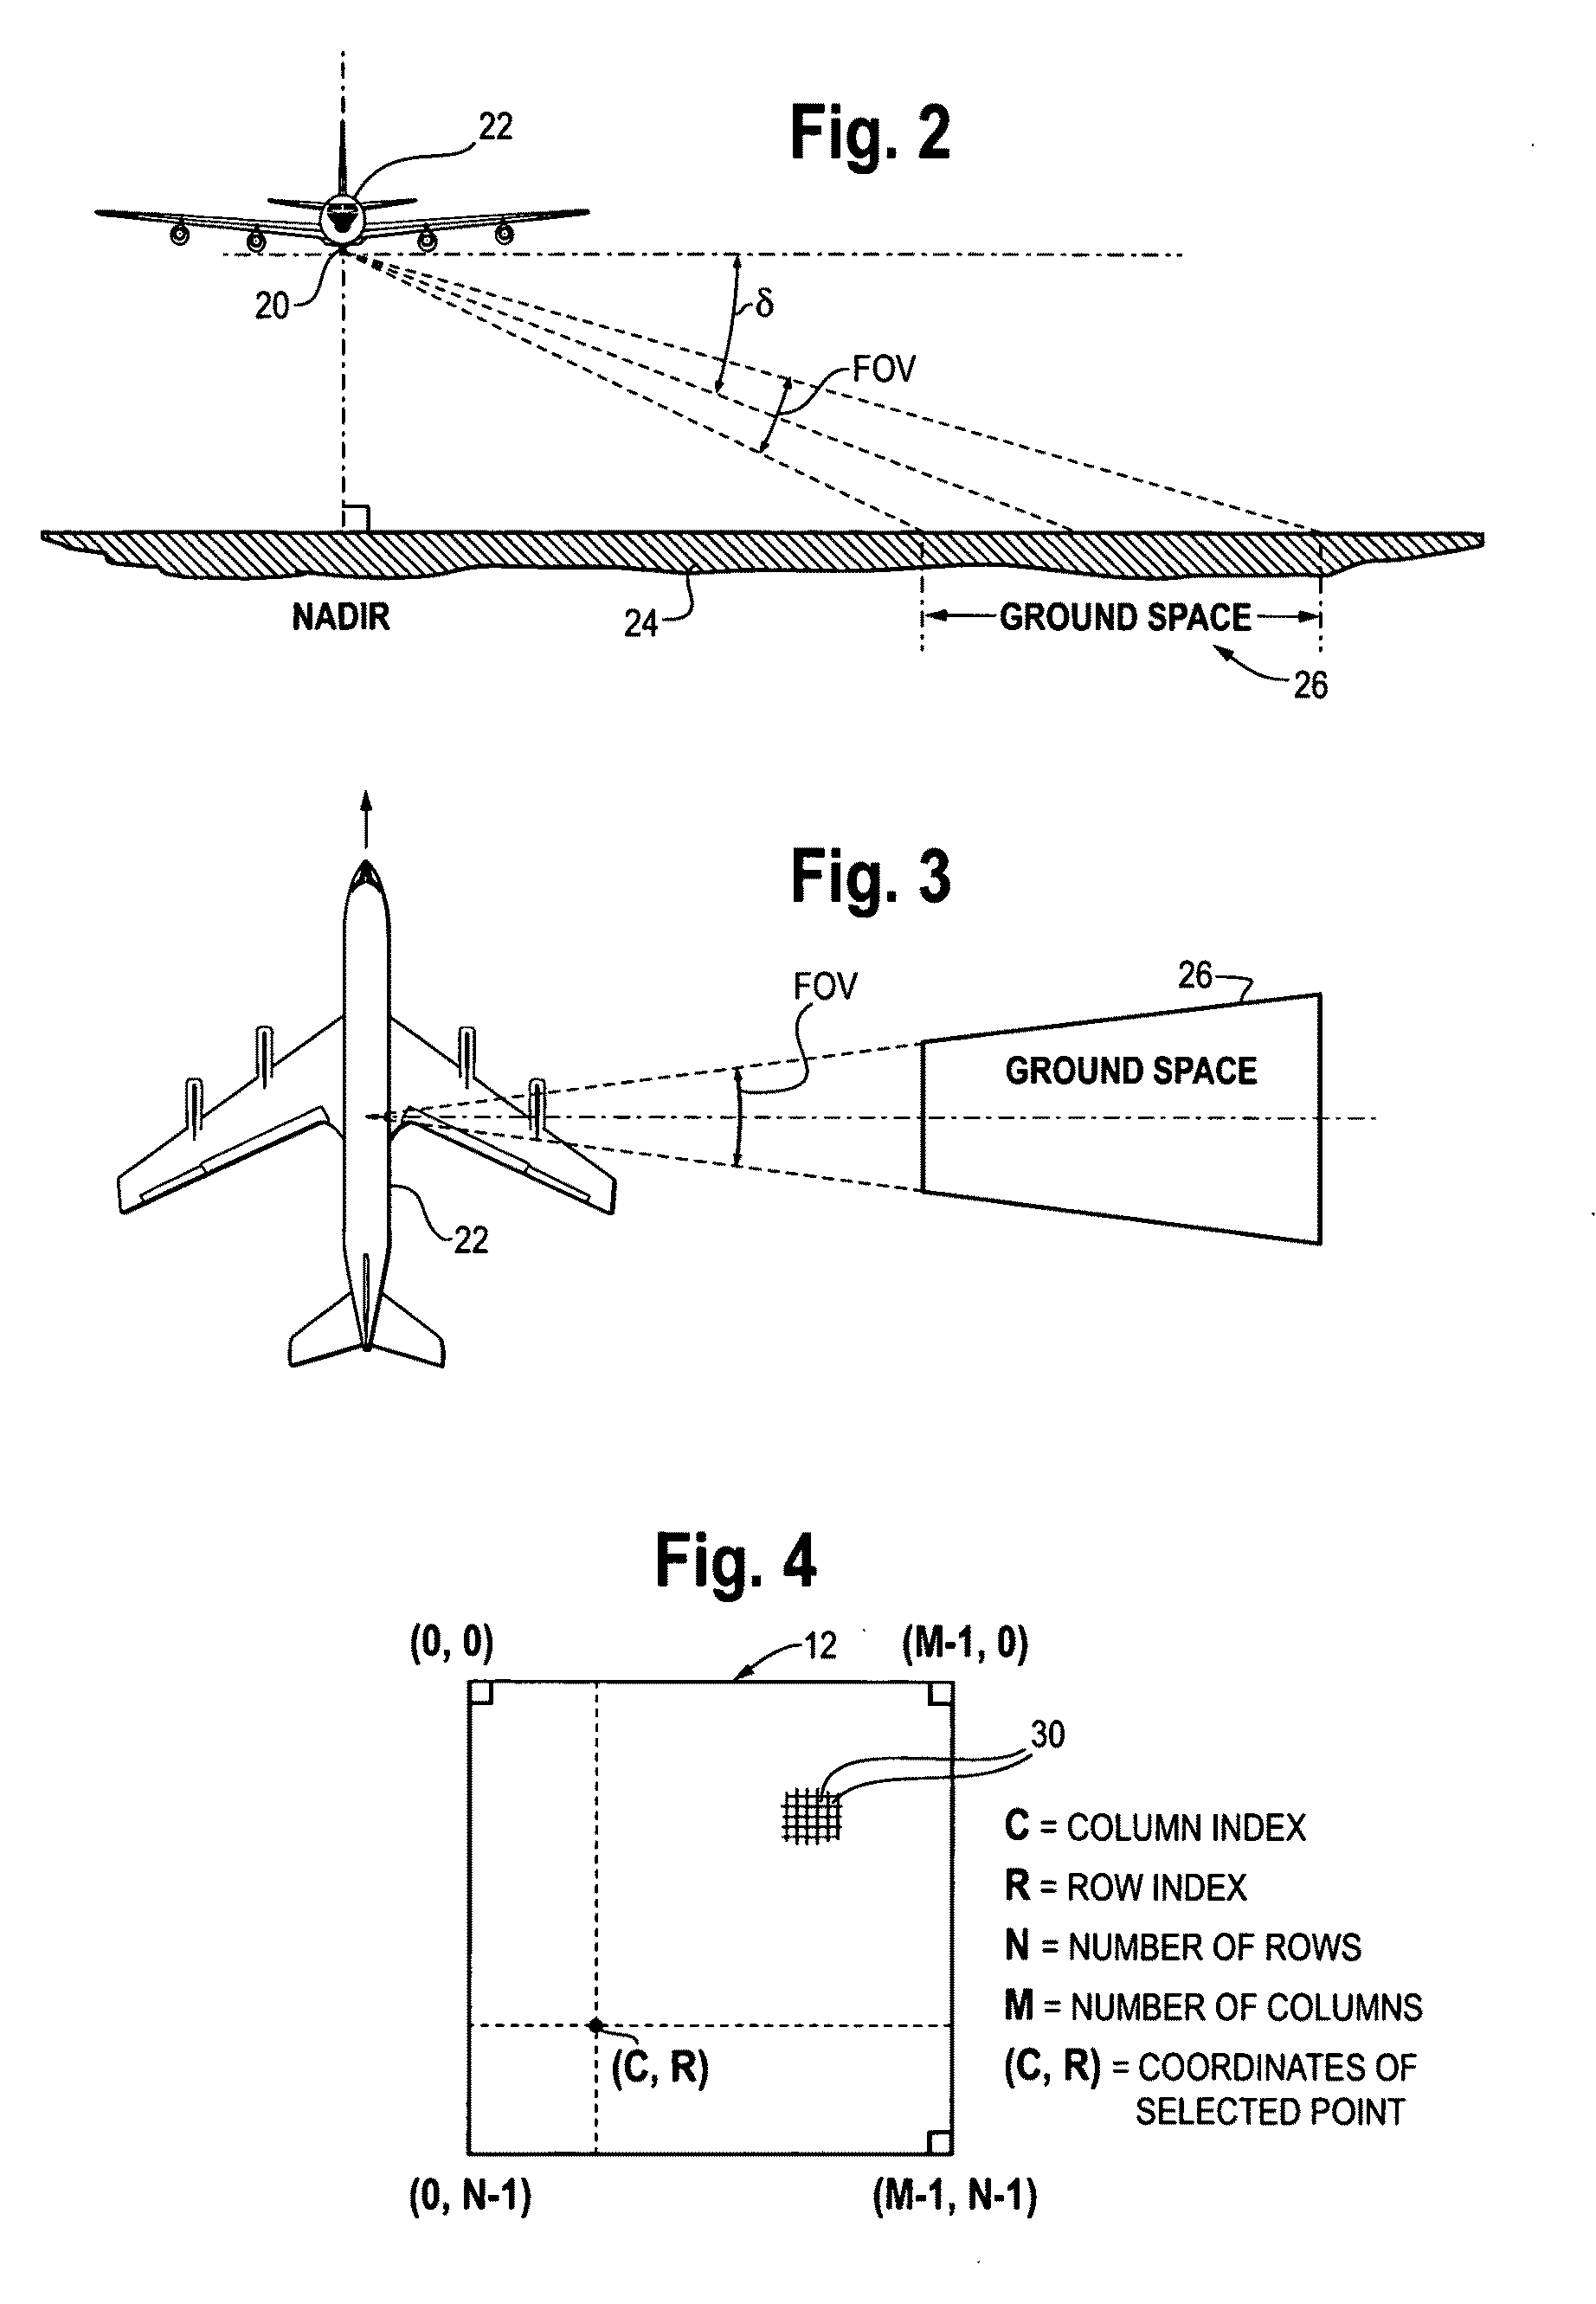 Method of object location in airborne imagery using recursive quad space image processing